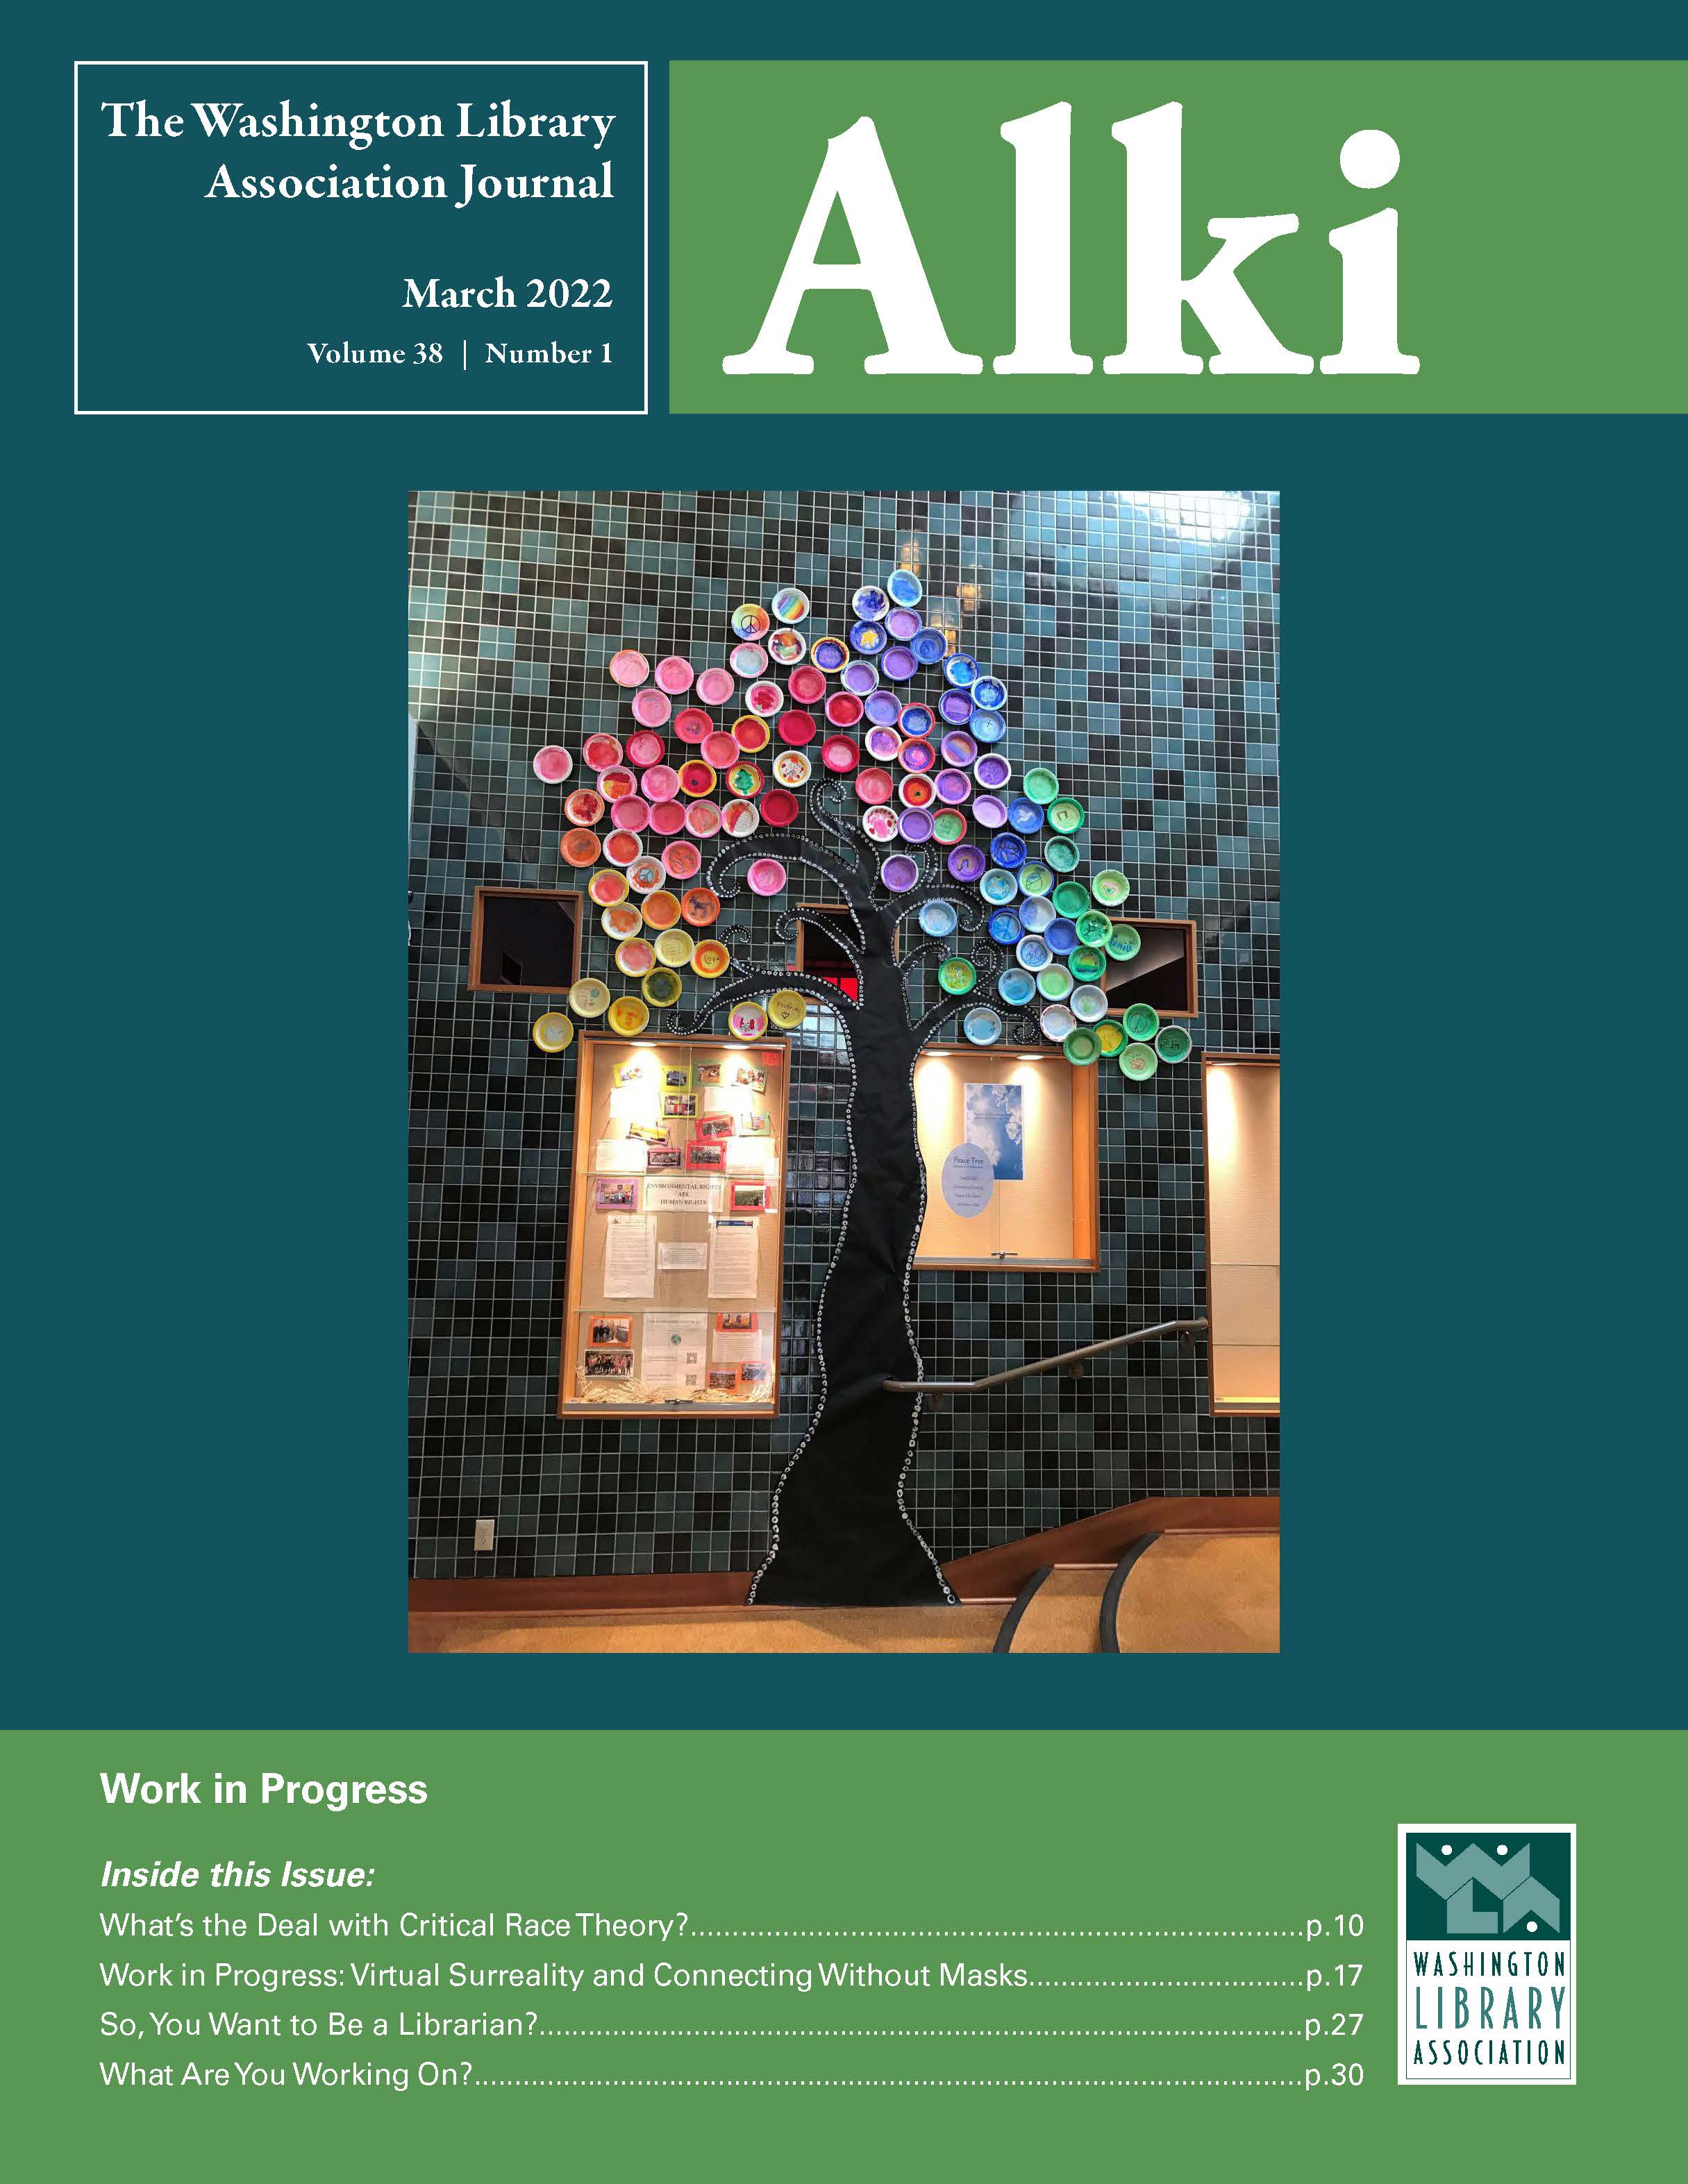 Cover image for March 2022 issue of Alki. The theme is Work in Progress and the cover image is a Peace Tree community art project where the leaves are colored paper plates. The colors for this issue are turquoise and green.